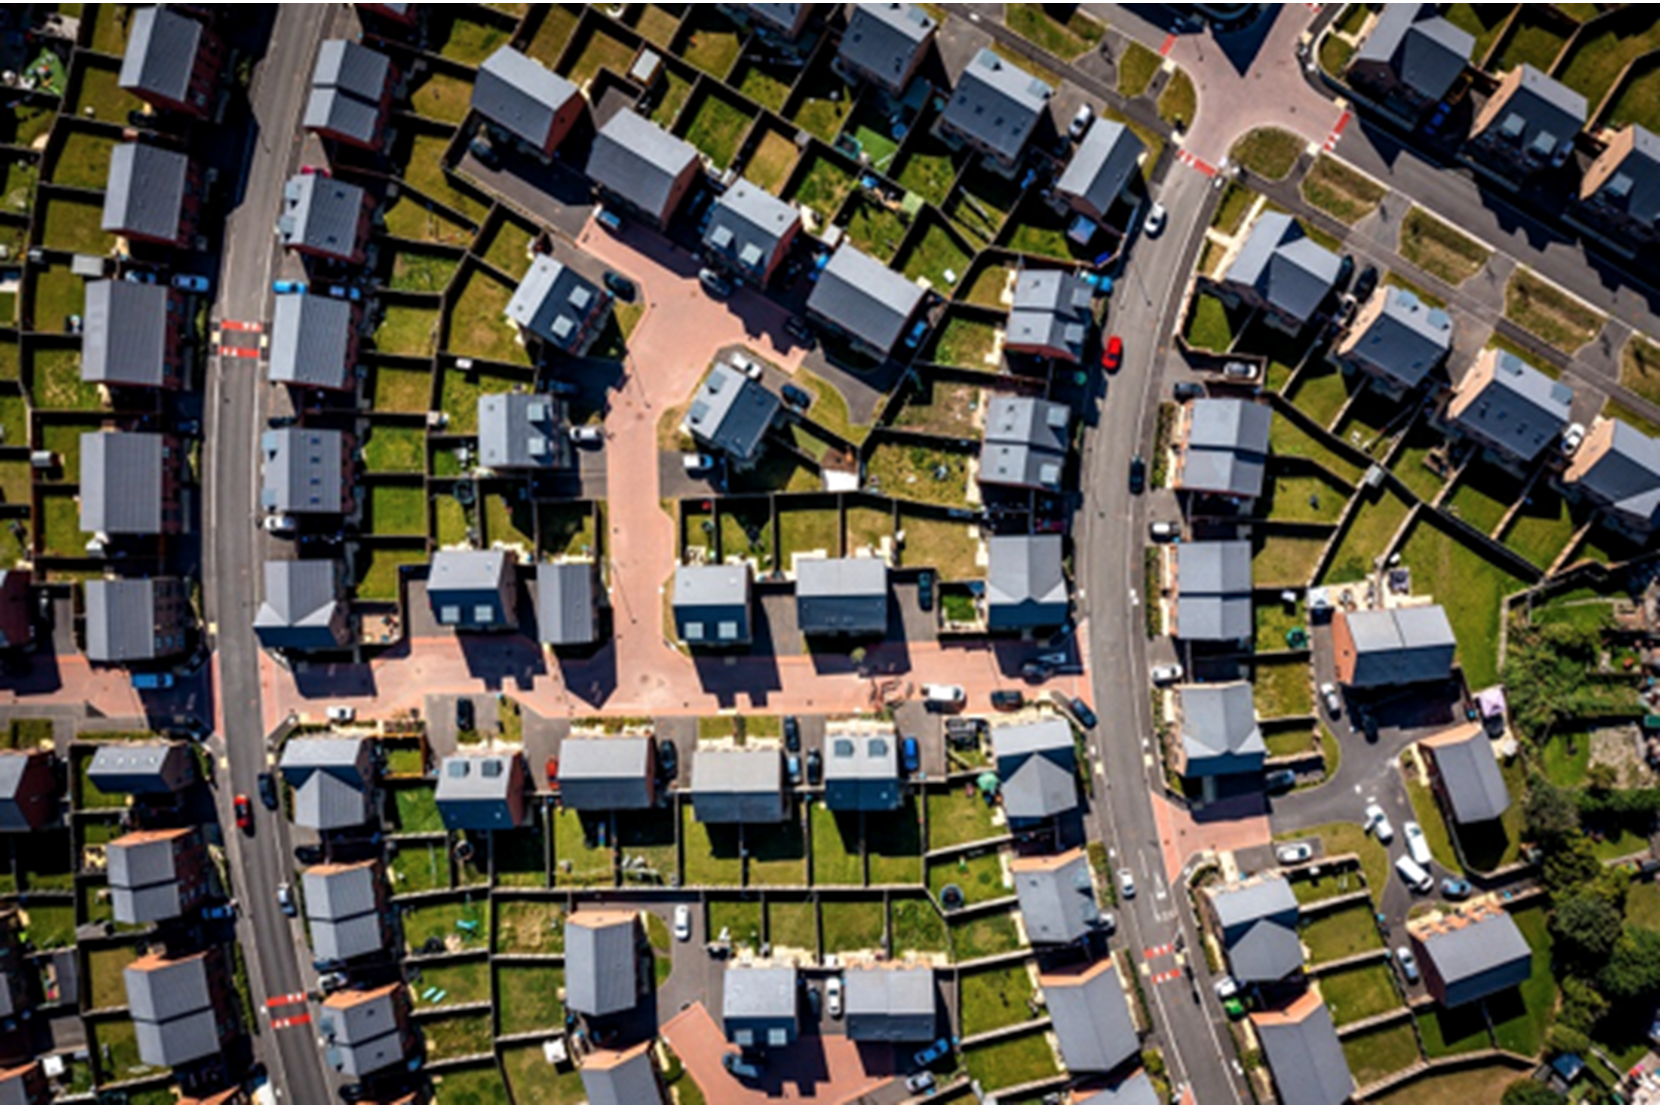 Houses to Rent by Simple Life in Princes's Gardens, Sheffield, S2, aerial development panoramic